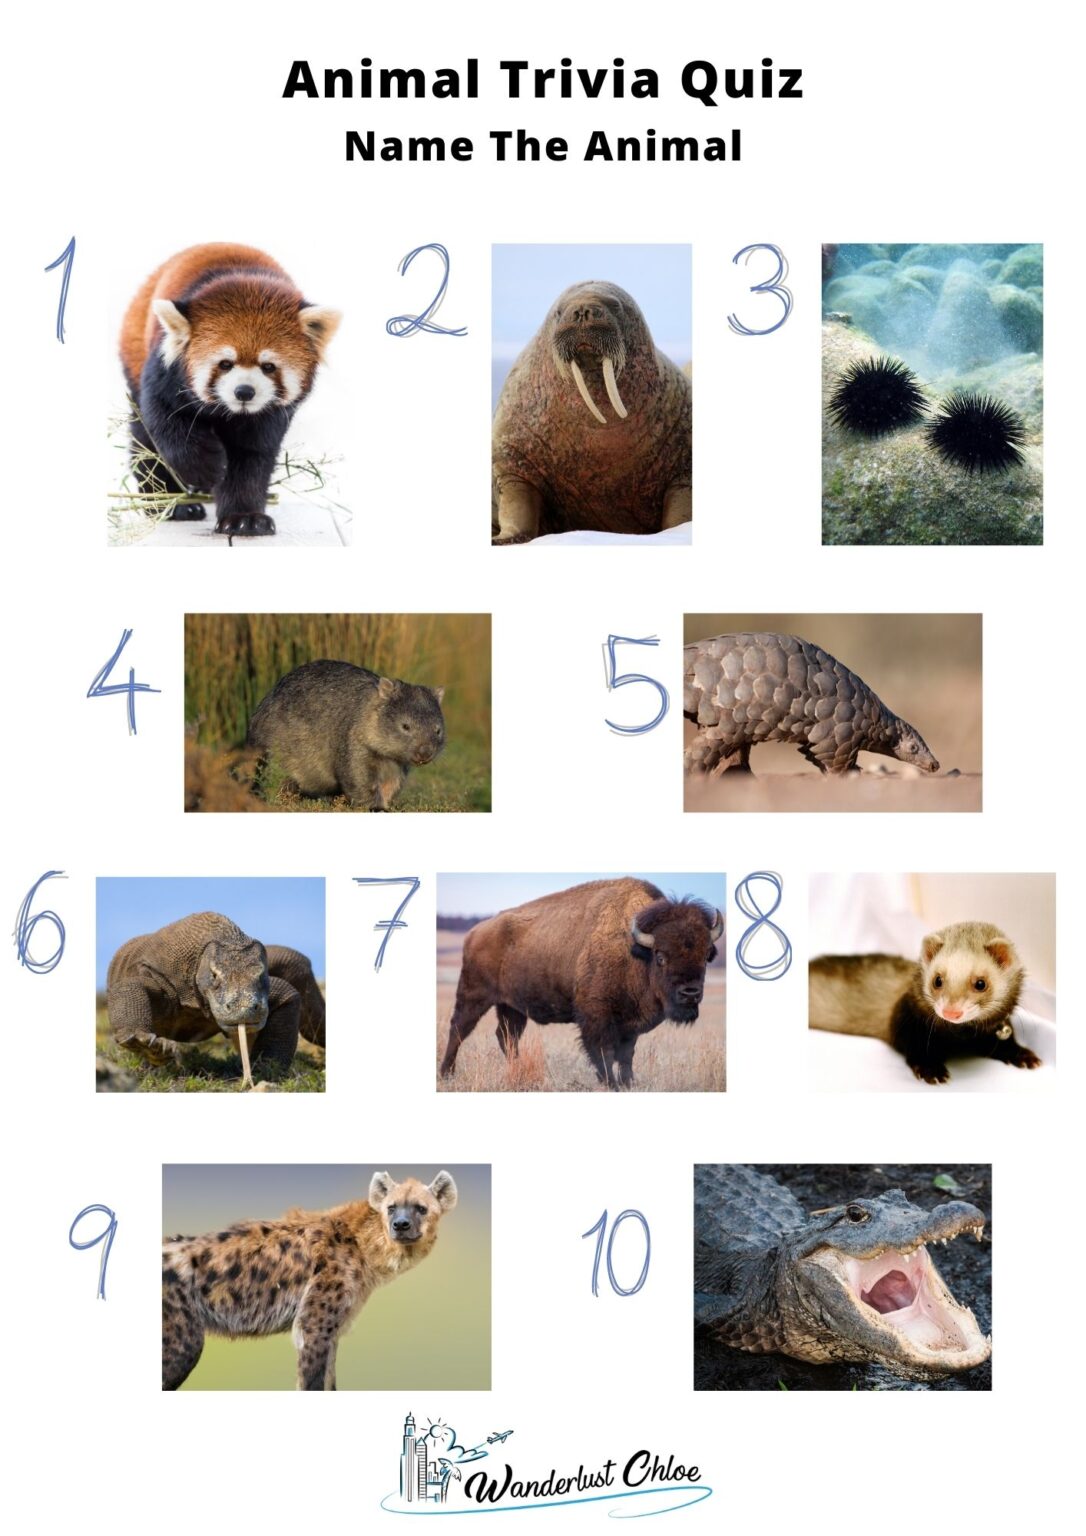 50 Animal Trivia Questions To Test Your Knowledge (2022)